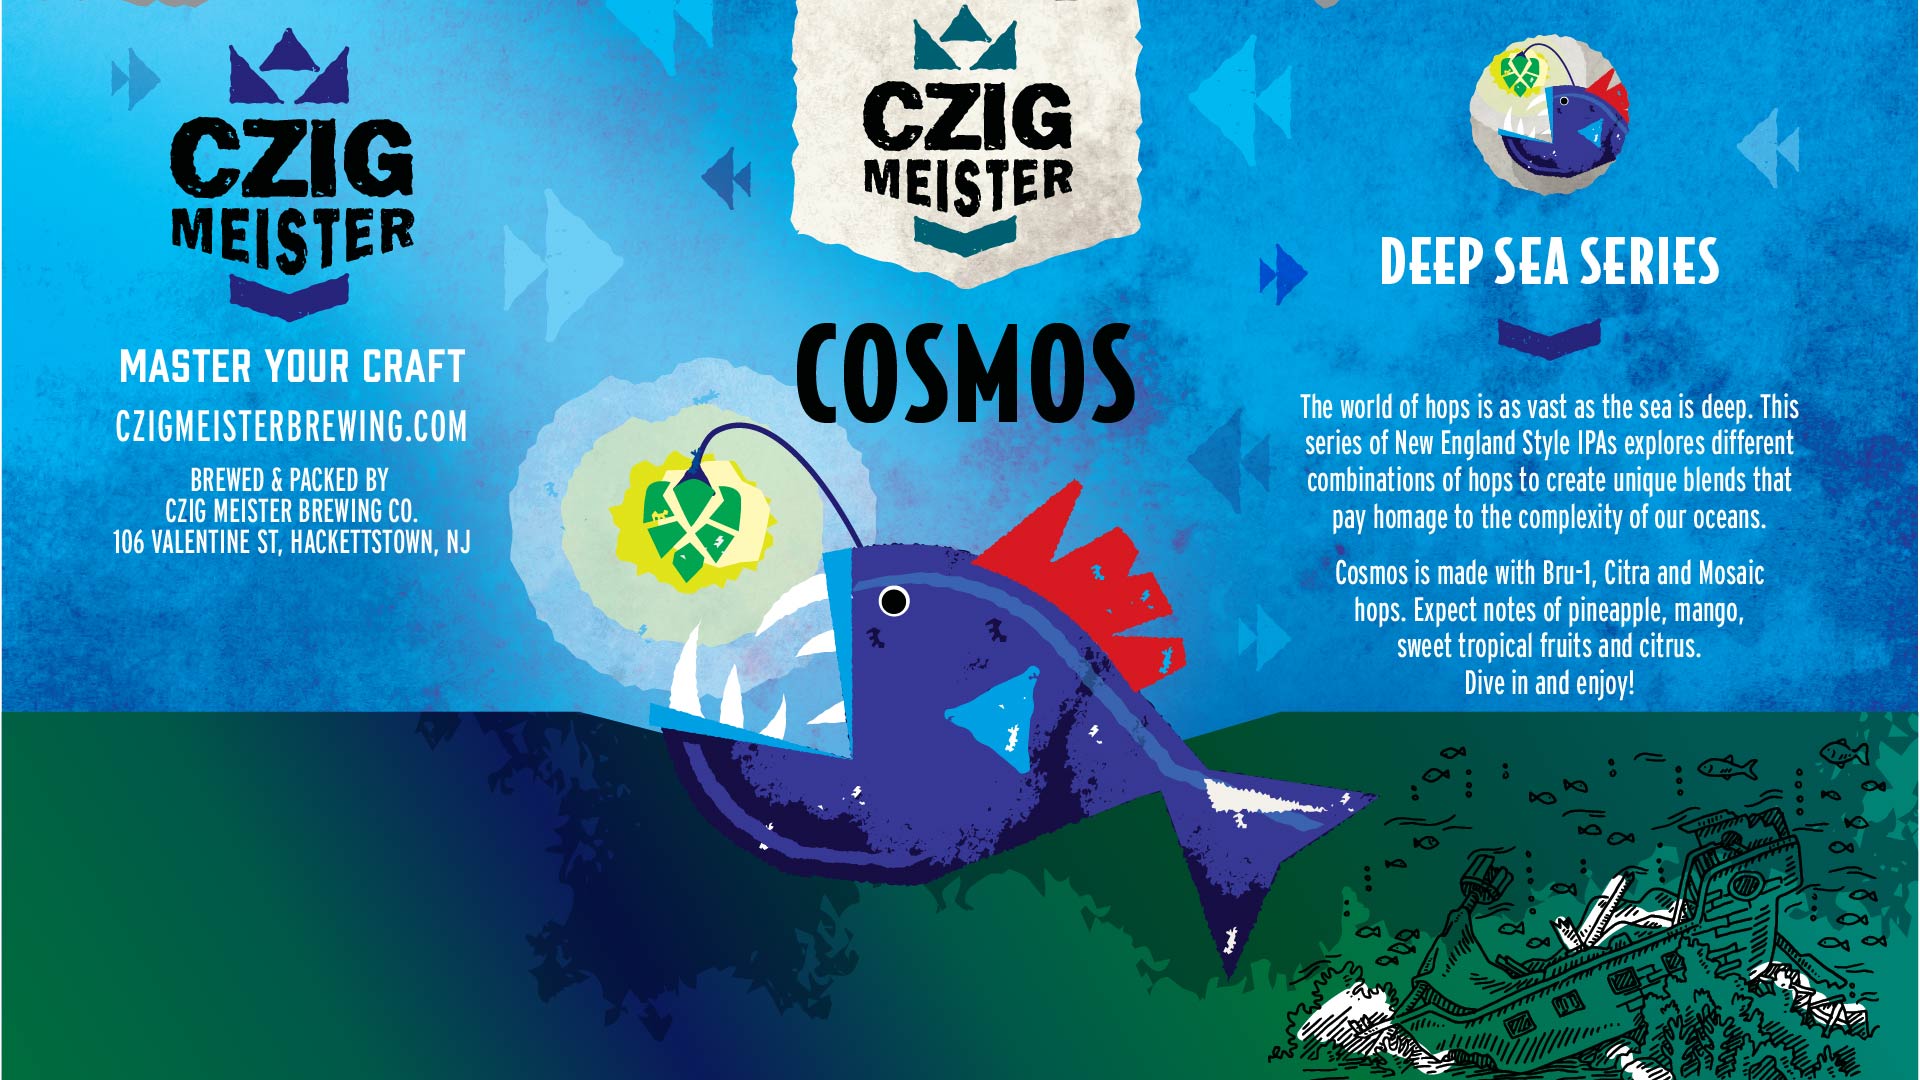 Deep Sea Series Cosmos New England Style IPA from Czig Meister Brewing Company